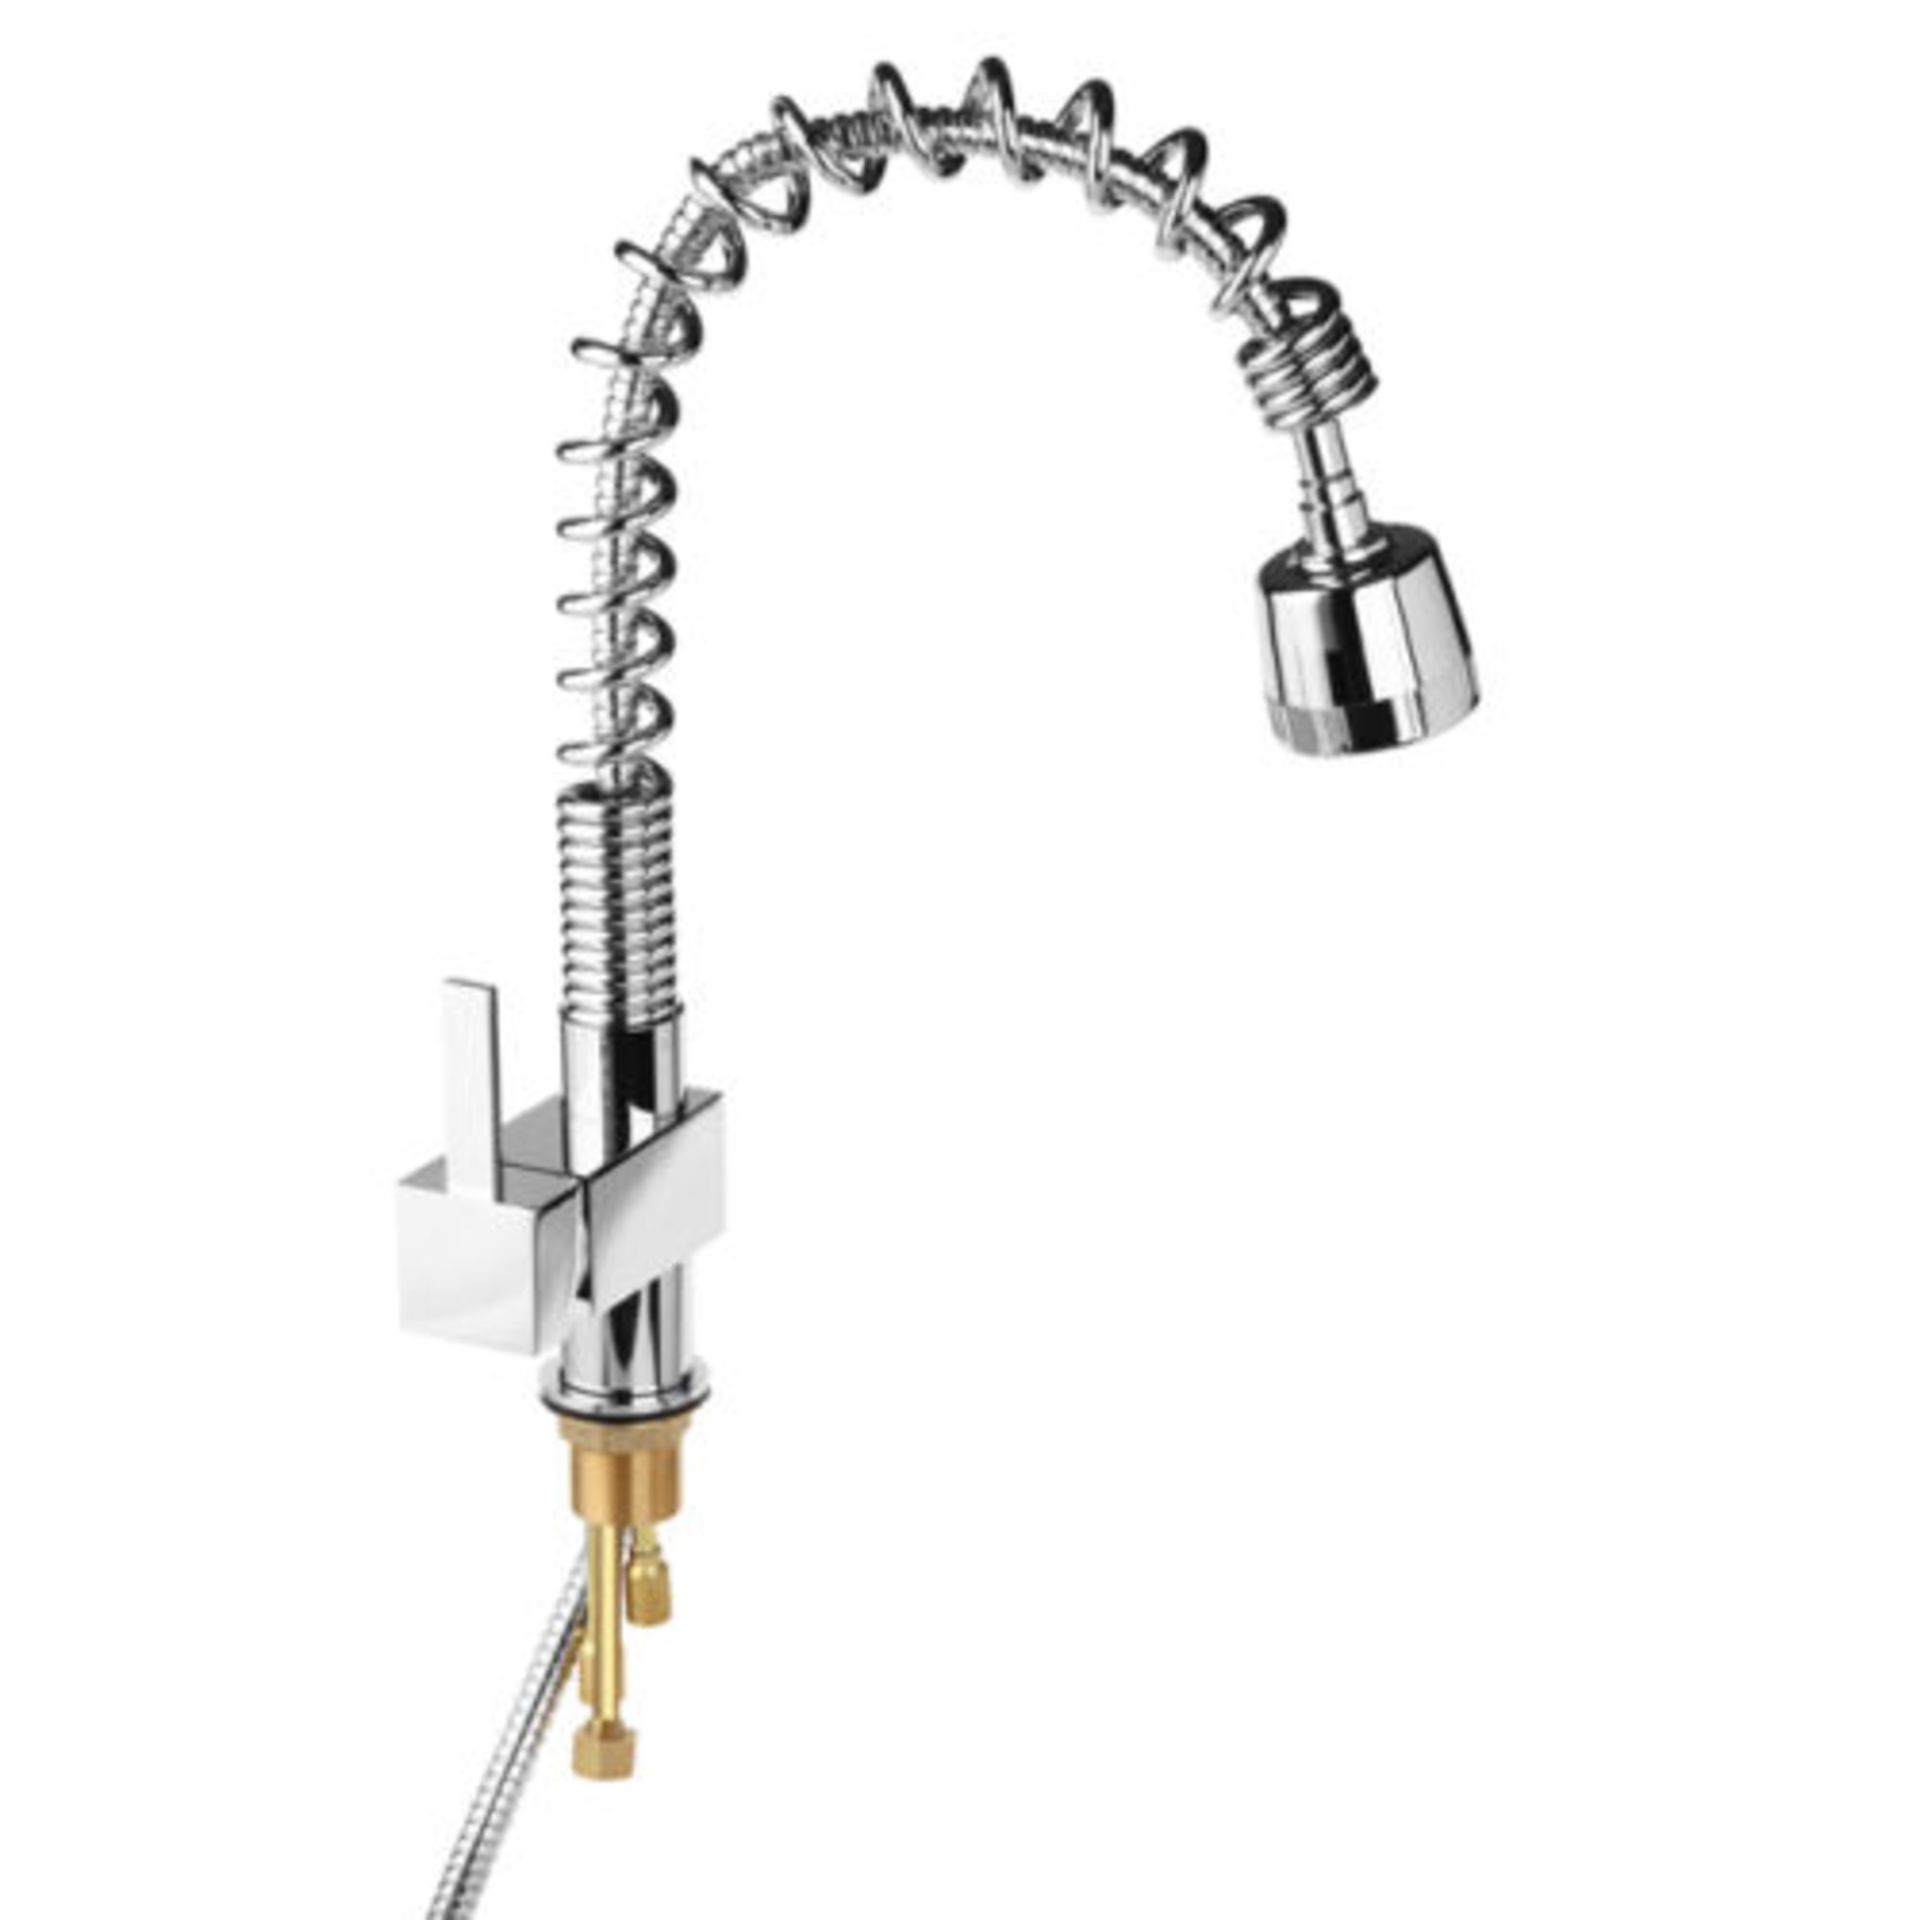 (G57) Maddie Brushed Chrome Monobloc Kitchen Tap Swivel Pull Out Spray Mixer. RRP £219.99. Material: - Image 4 of 4